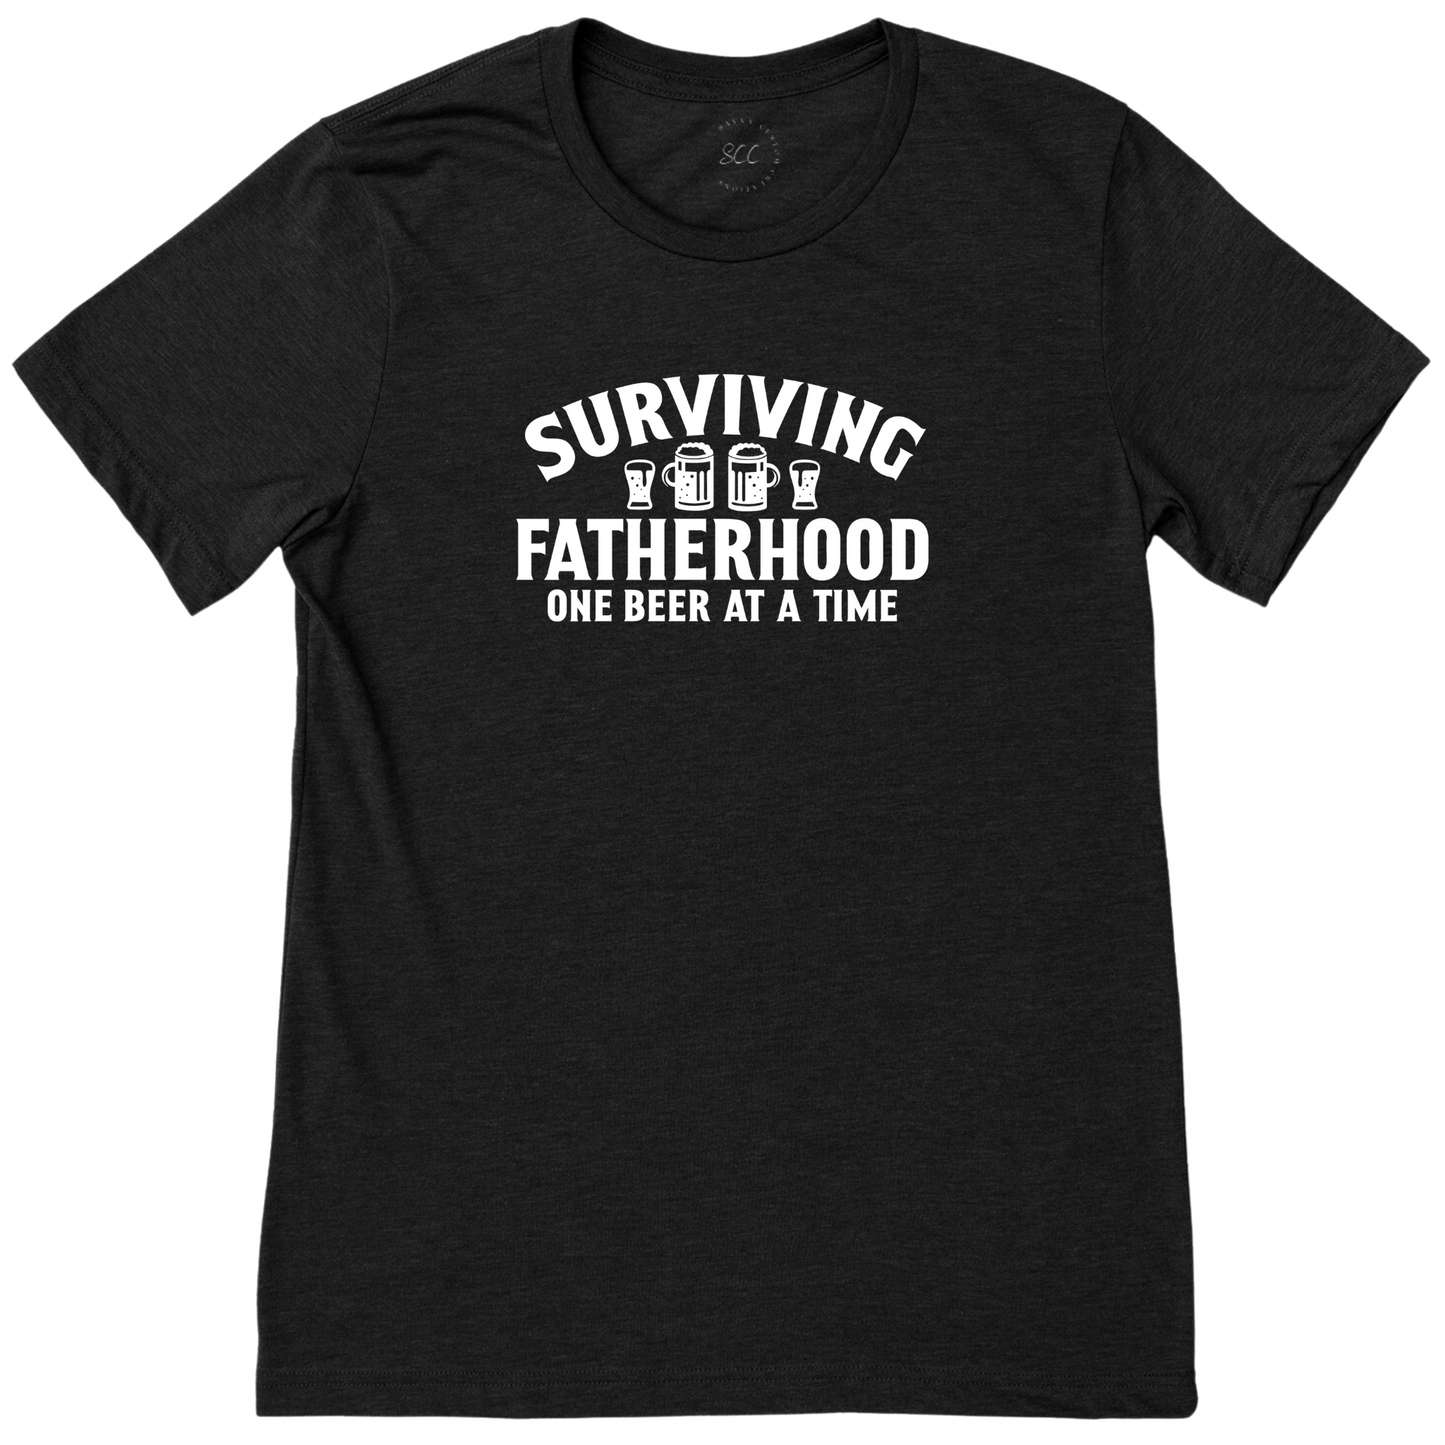 SURVIVING FATHERHOOD, ONE BEER AT A TIME - Unisex Crewneck T-Shirt